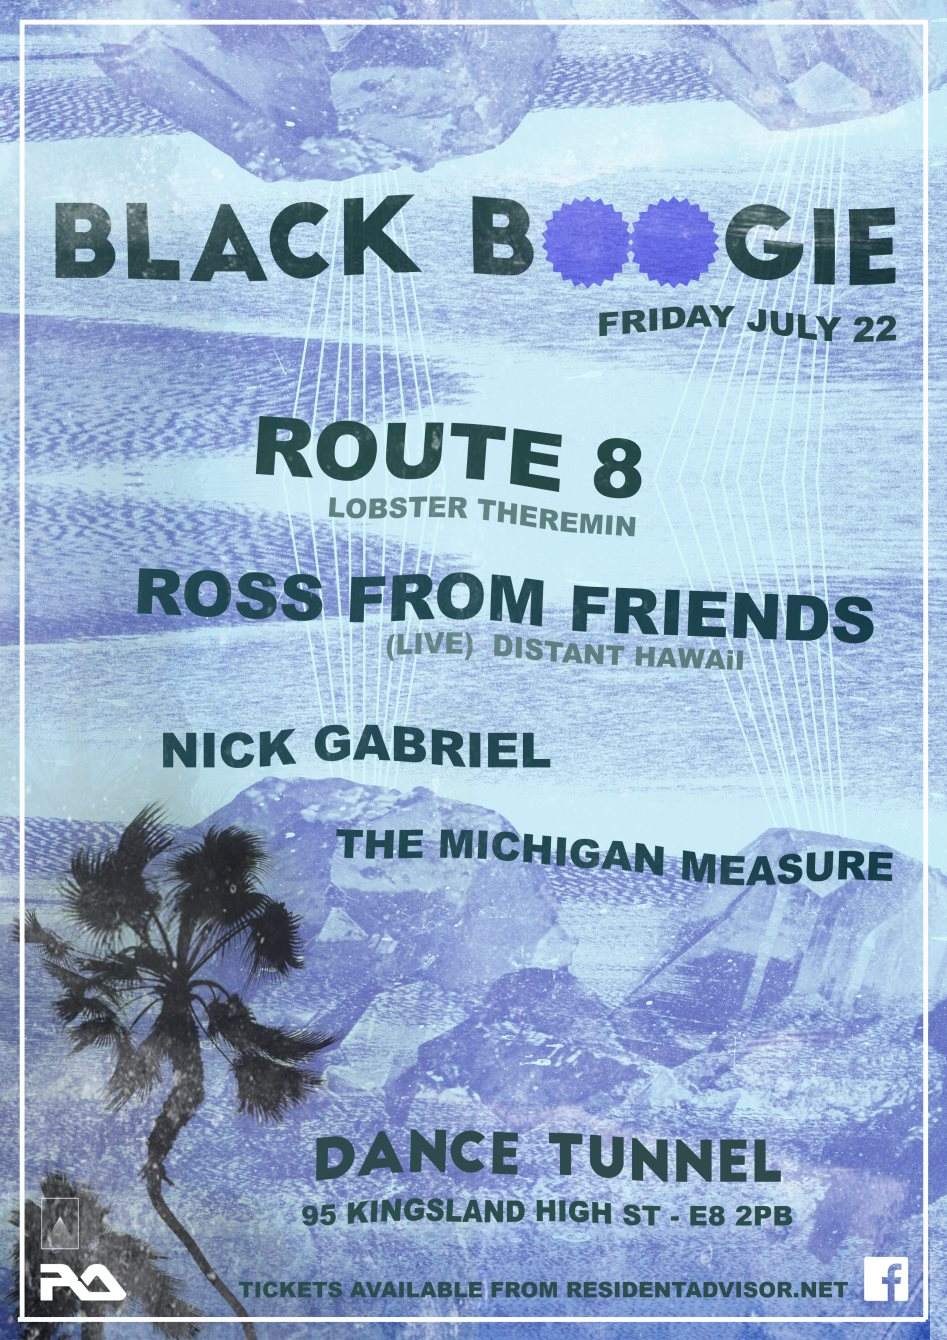 Black Boogie with Route 8 & Ross From Friends (Live) - Página trasera